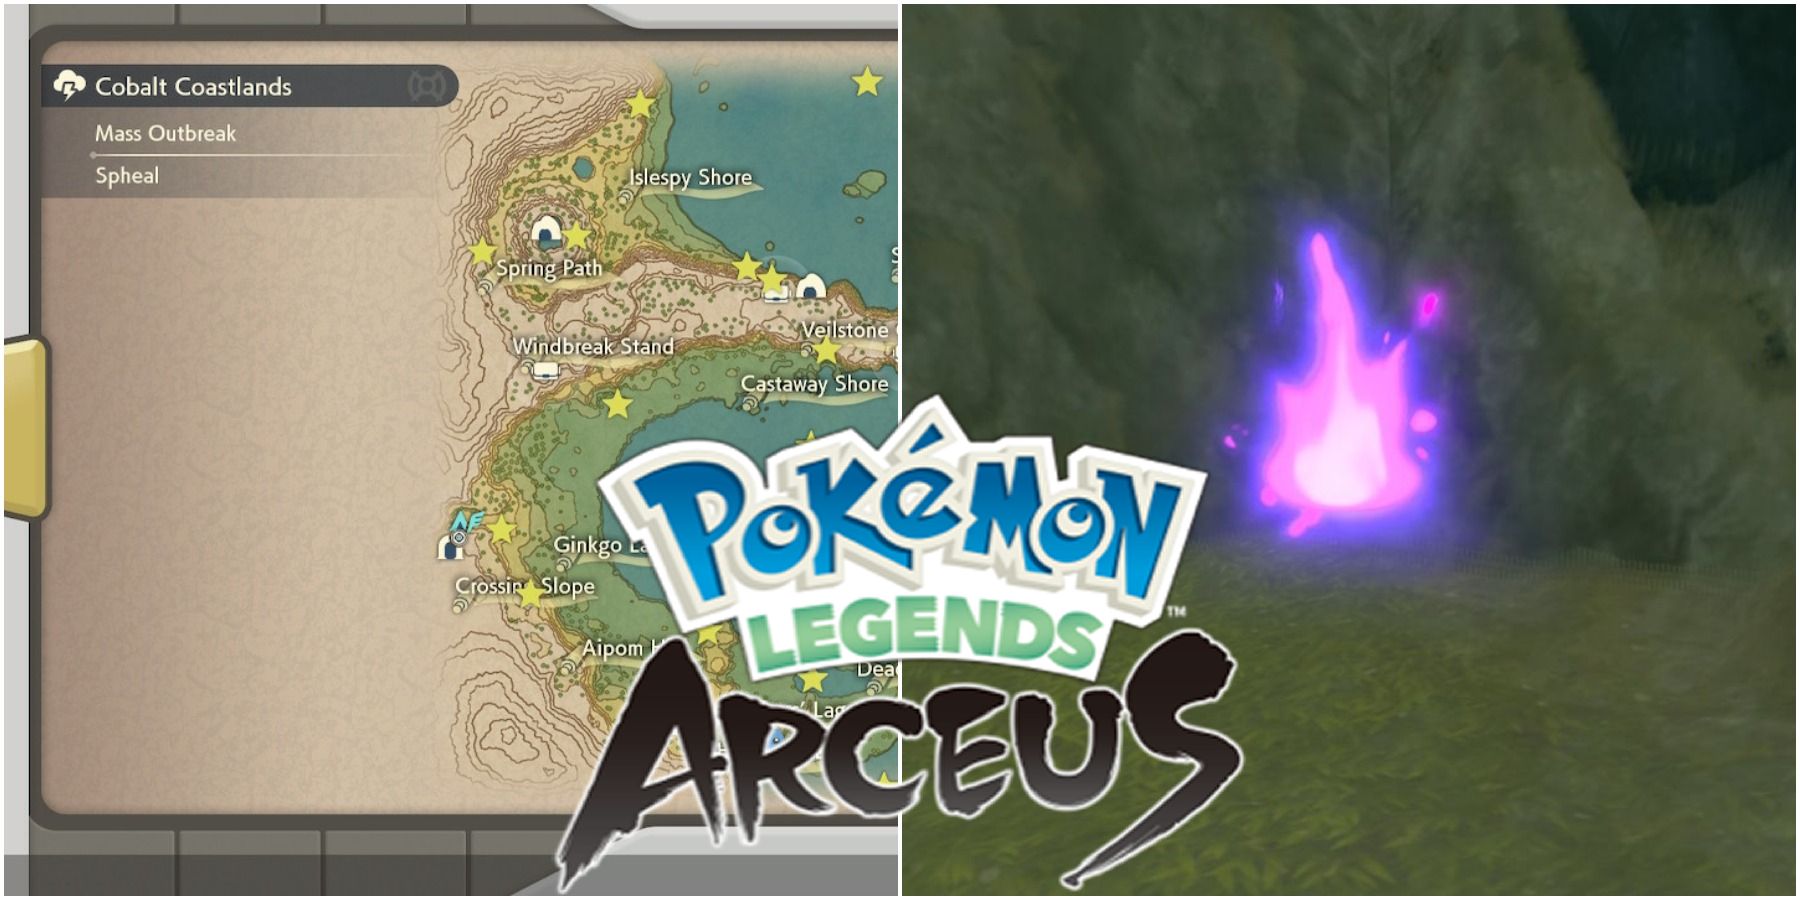 Pokémon Legends Arceus Wisp locations: How to complete Eerie Apparitions in  the Night